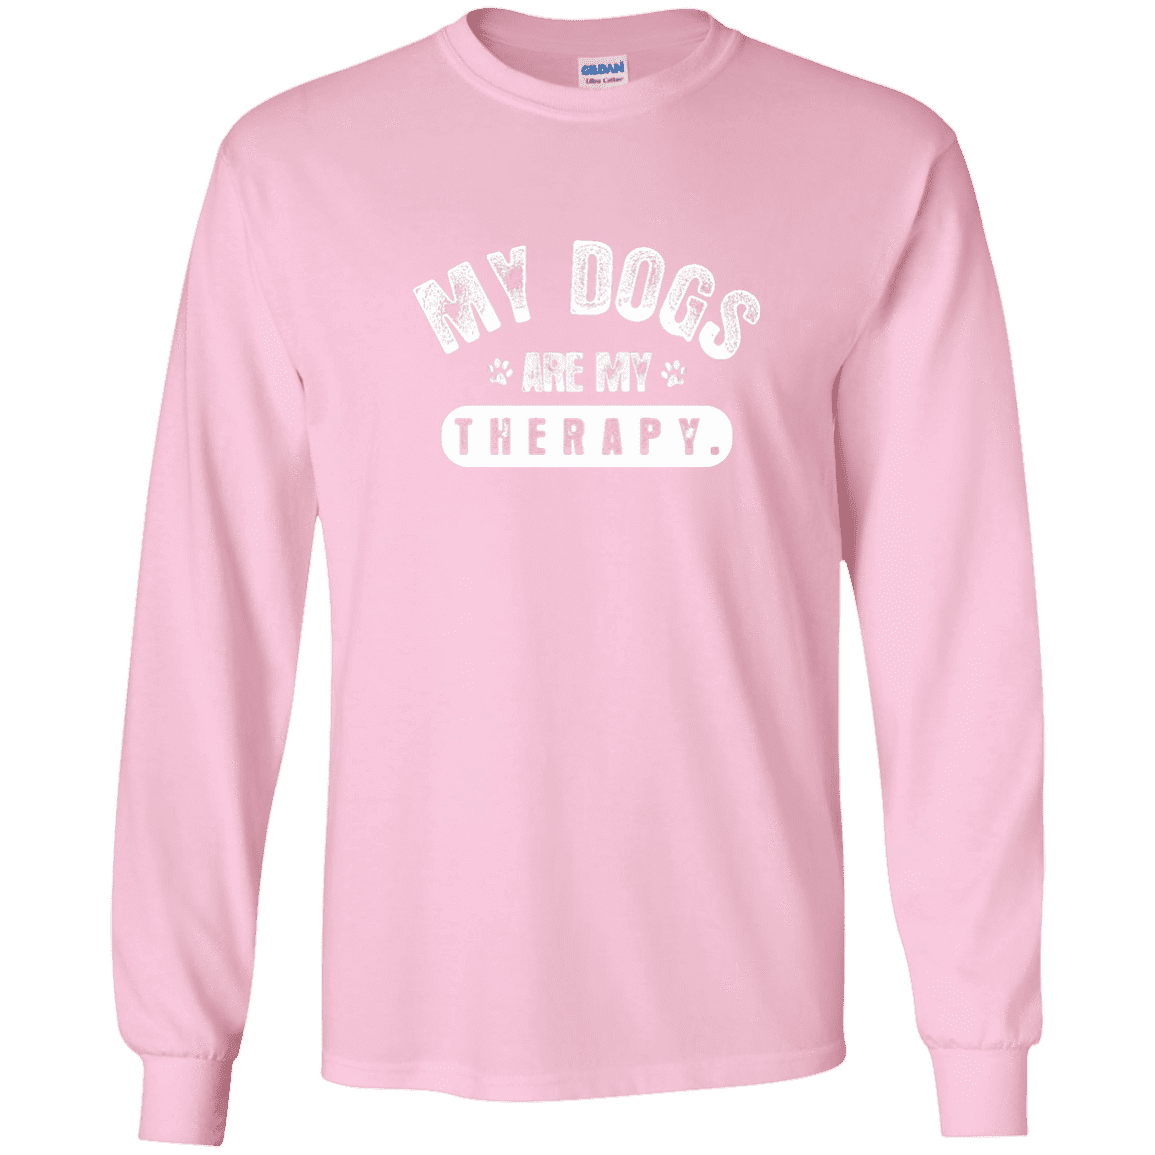 My Dogs Are My Therapy - Long Sleeve T Shirt.